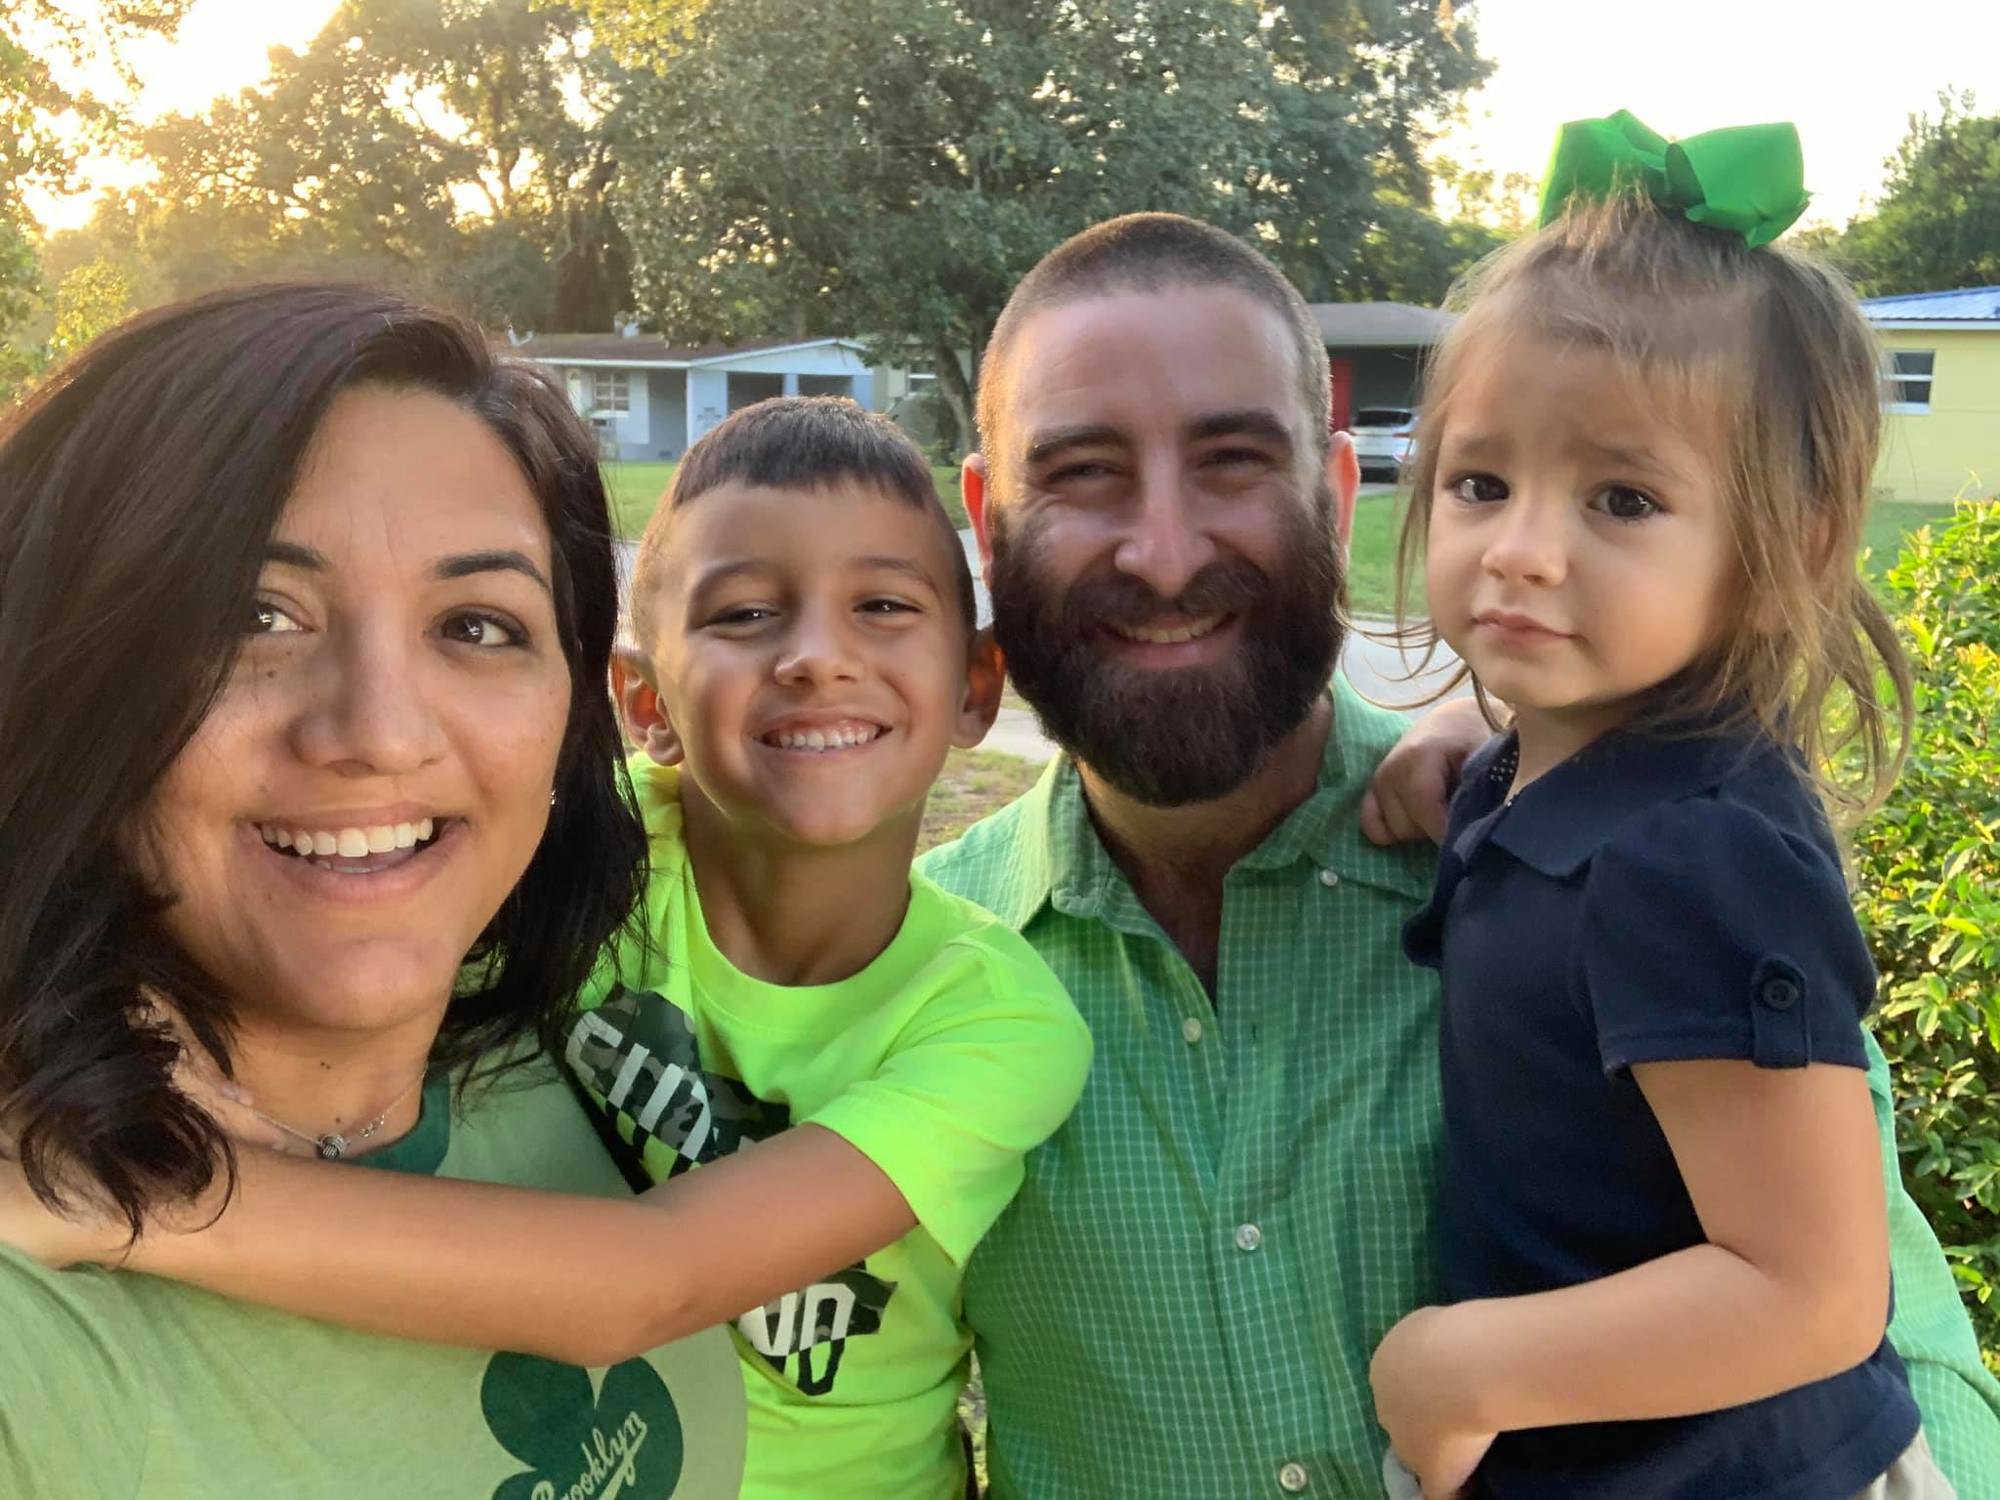 The Wilber family wore green in October for Phelan-McDermid Syndrome Awareness Day. (Courtesy Devin Wilber)